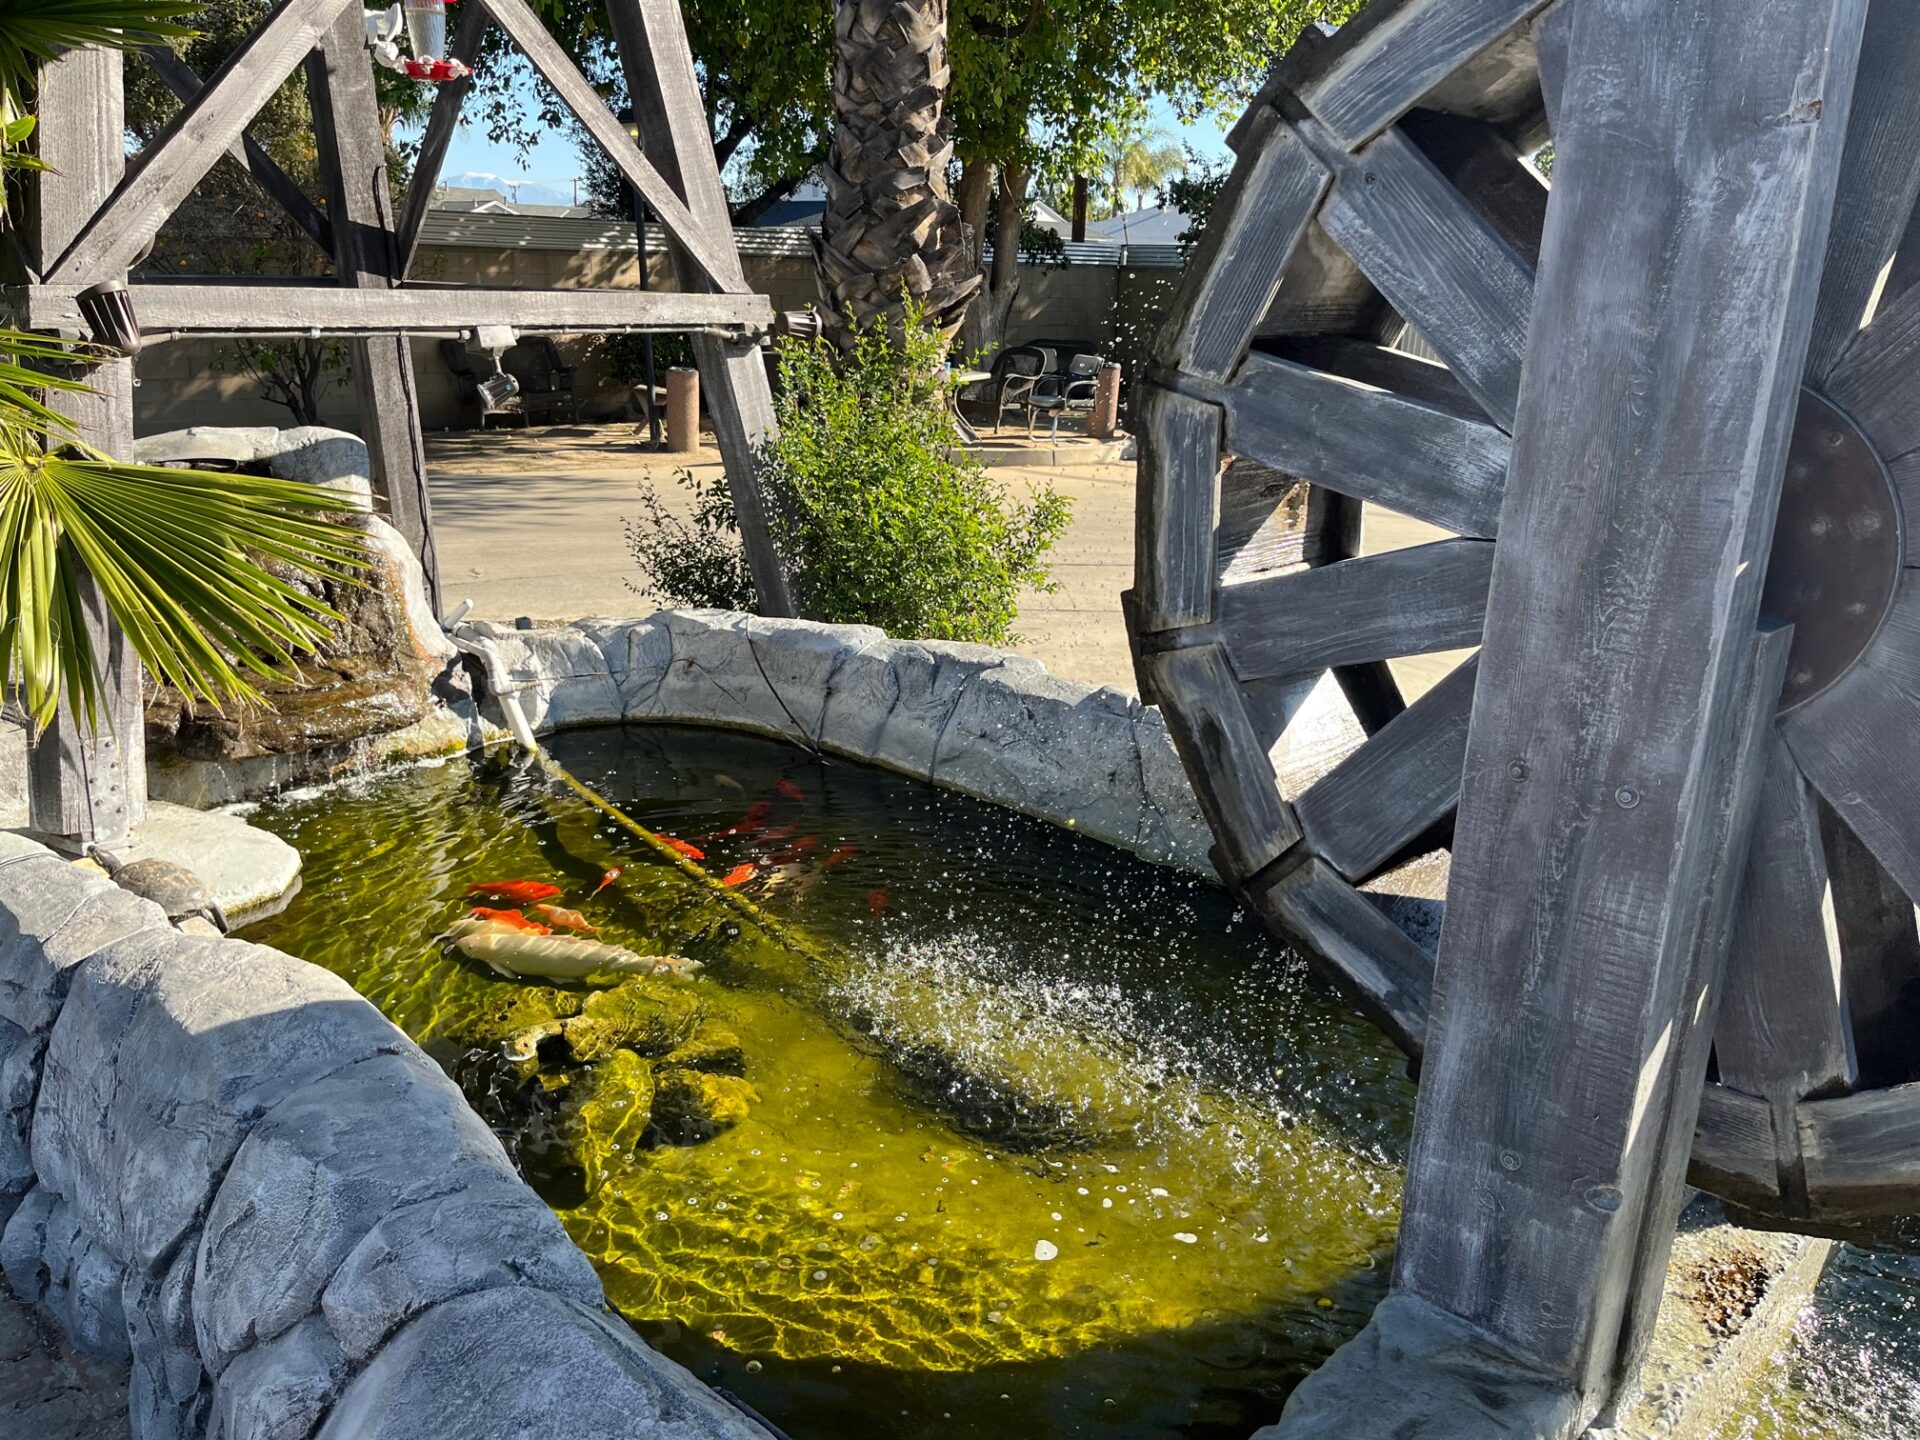 A pond with water wheels and fish in it